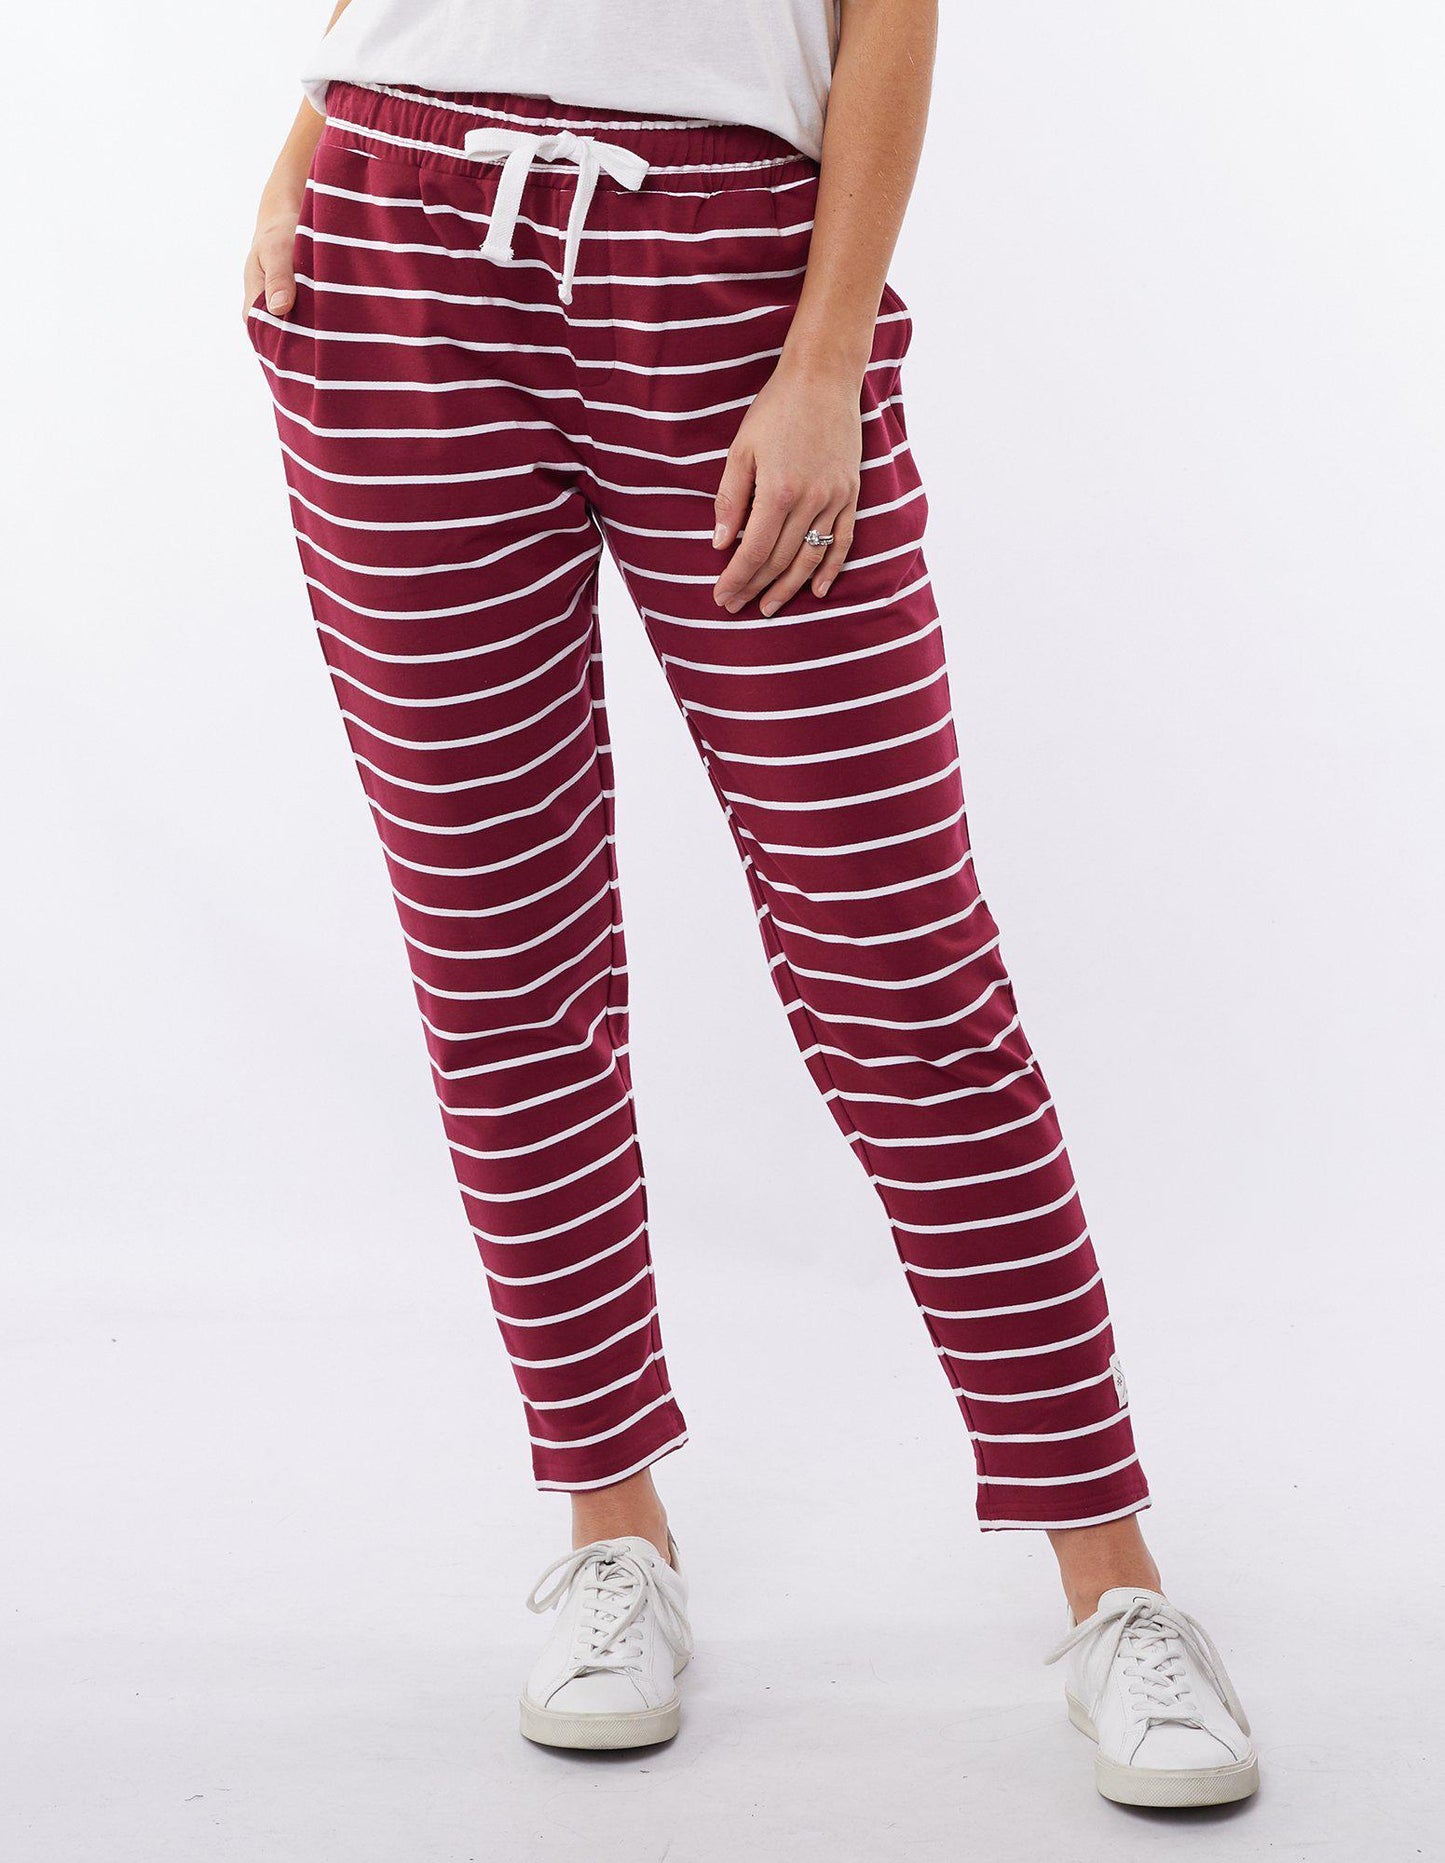 The Lobby Pant - Berry Red/White Stripe - Elm Lifestyle - FUDGE Gifts Home Lifestyle